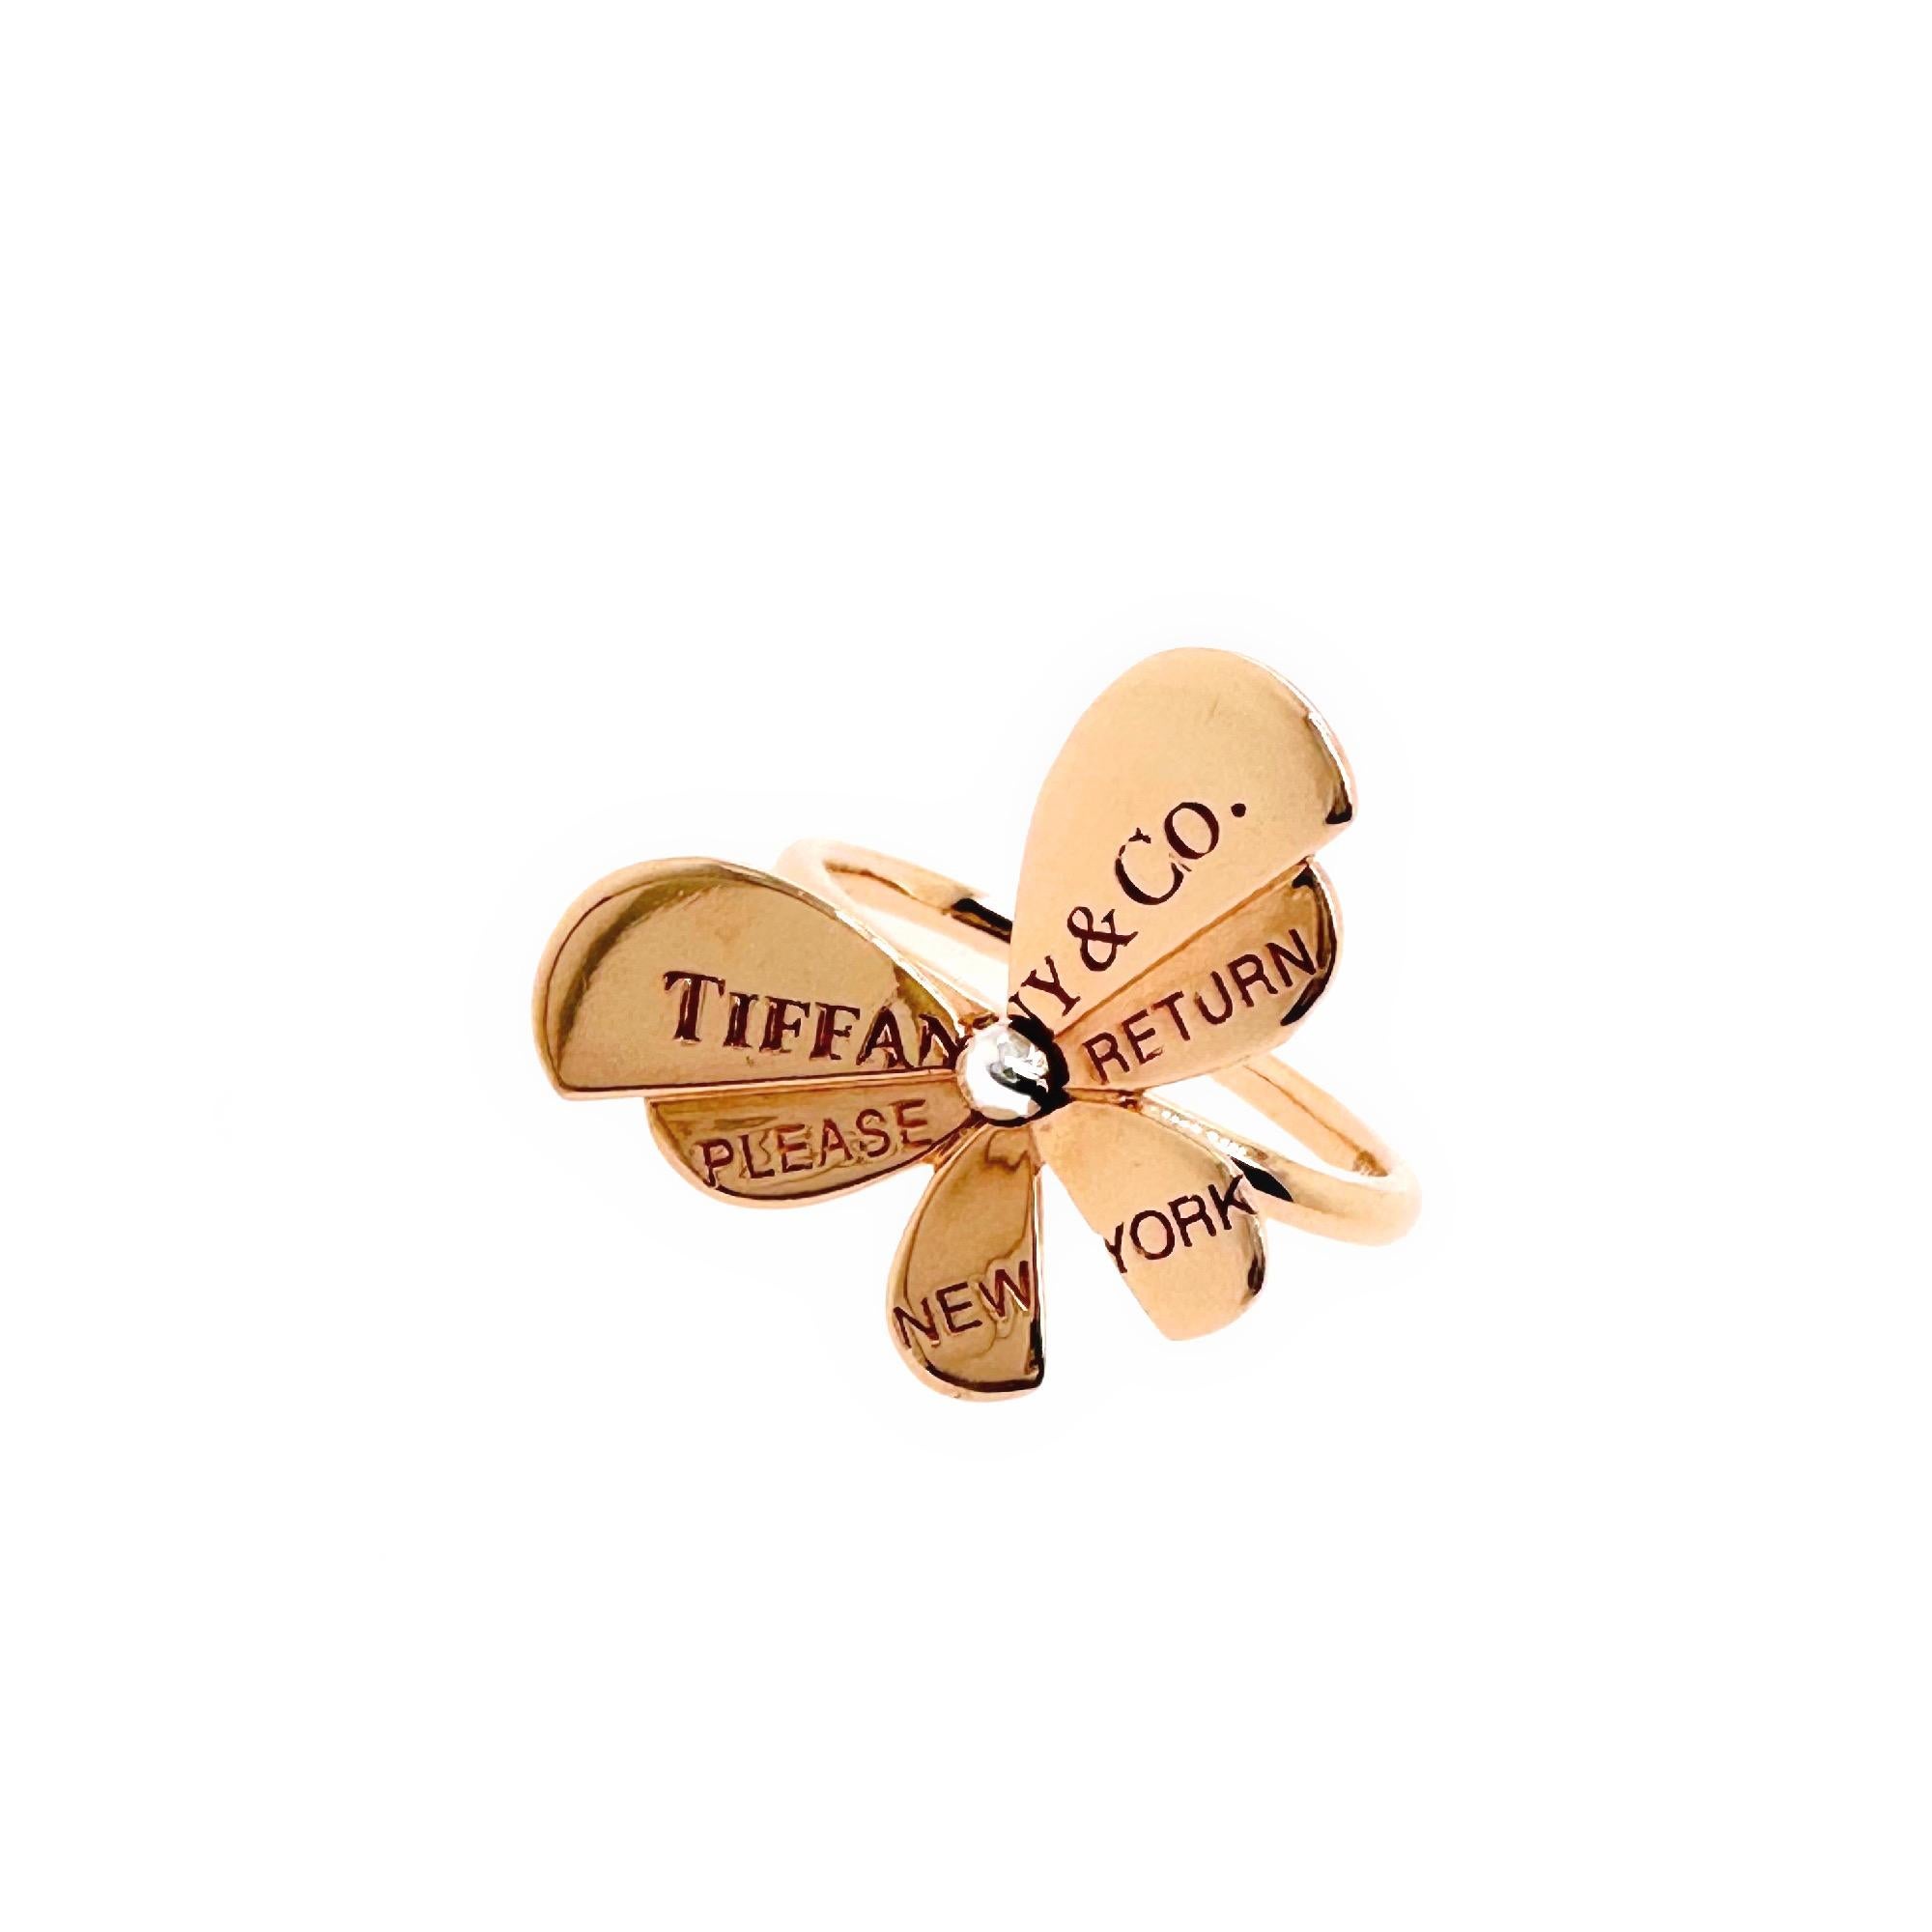 Tiffany & Co Return to Tiffany Love Bug Collection
Style:  Ring
Ref. number:  67070925
Metal:  18k Rose Gold & Sterling Silver
Design:  Butterfly with 